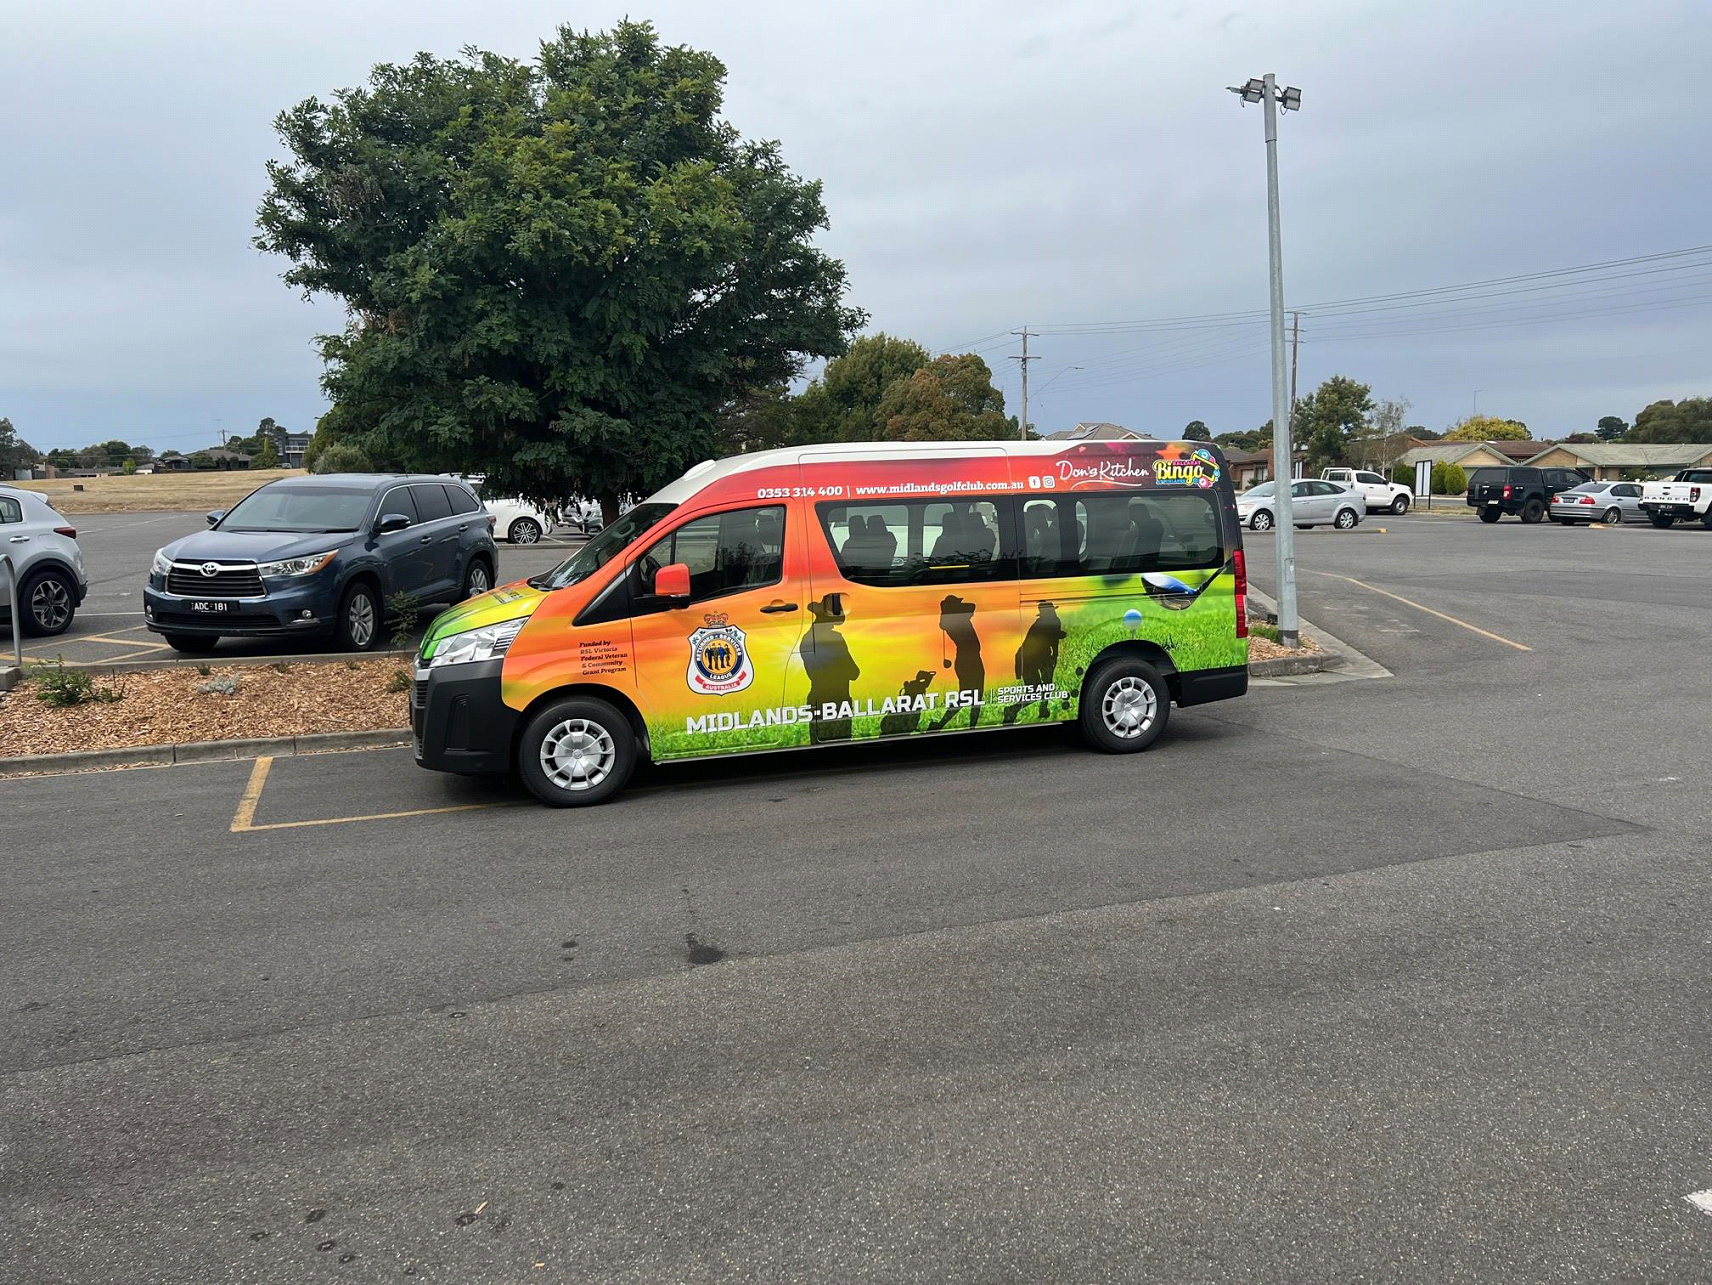 a colorful van that says 